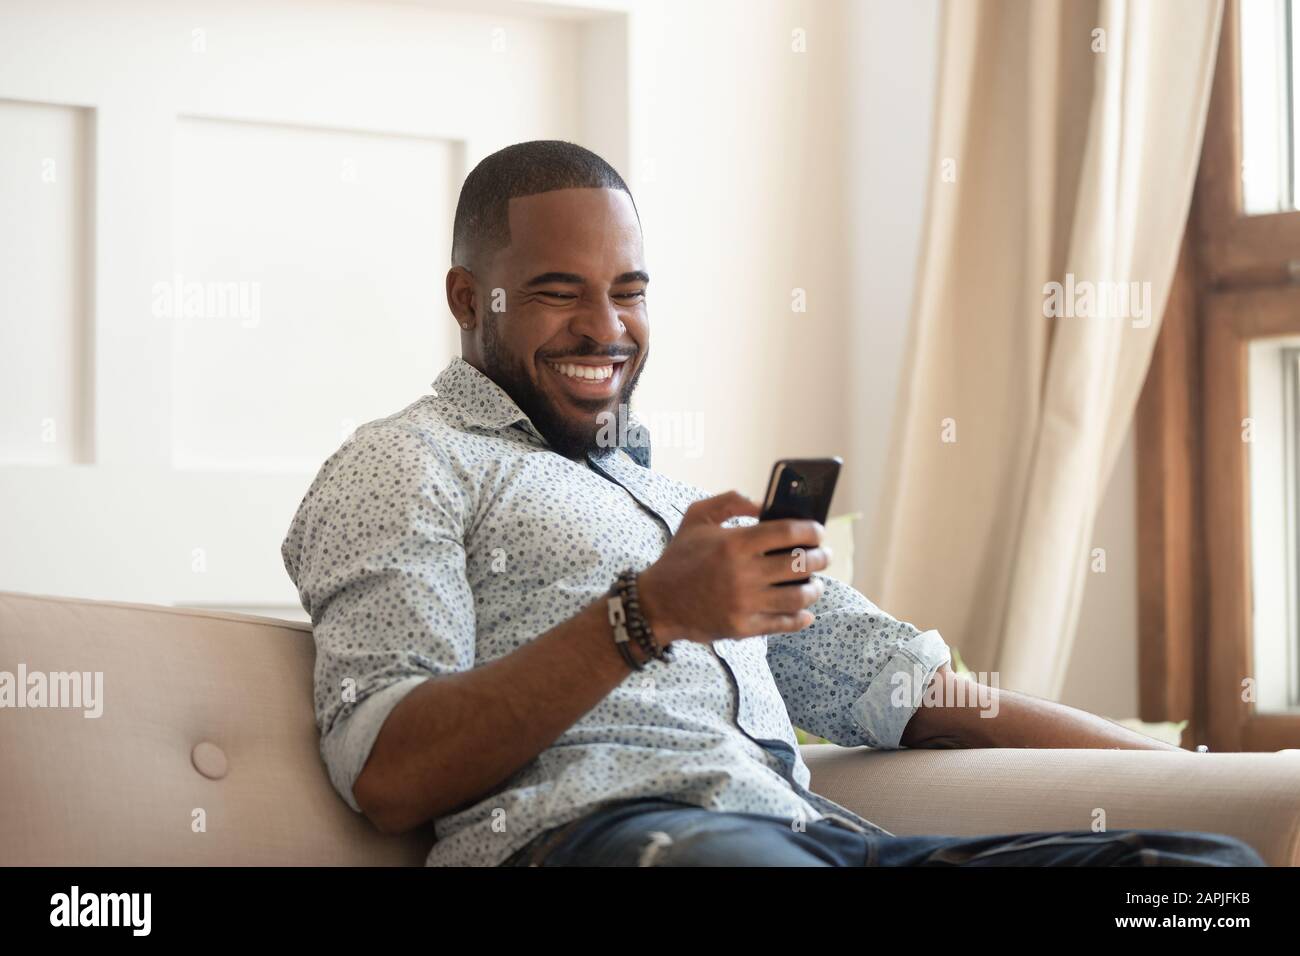 Cheerful african guy sitting on couch spending time using smartphone Stock Photo